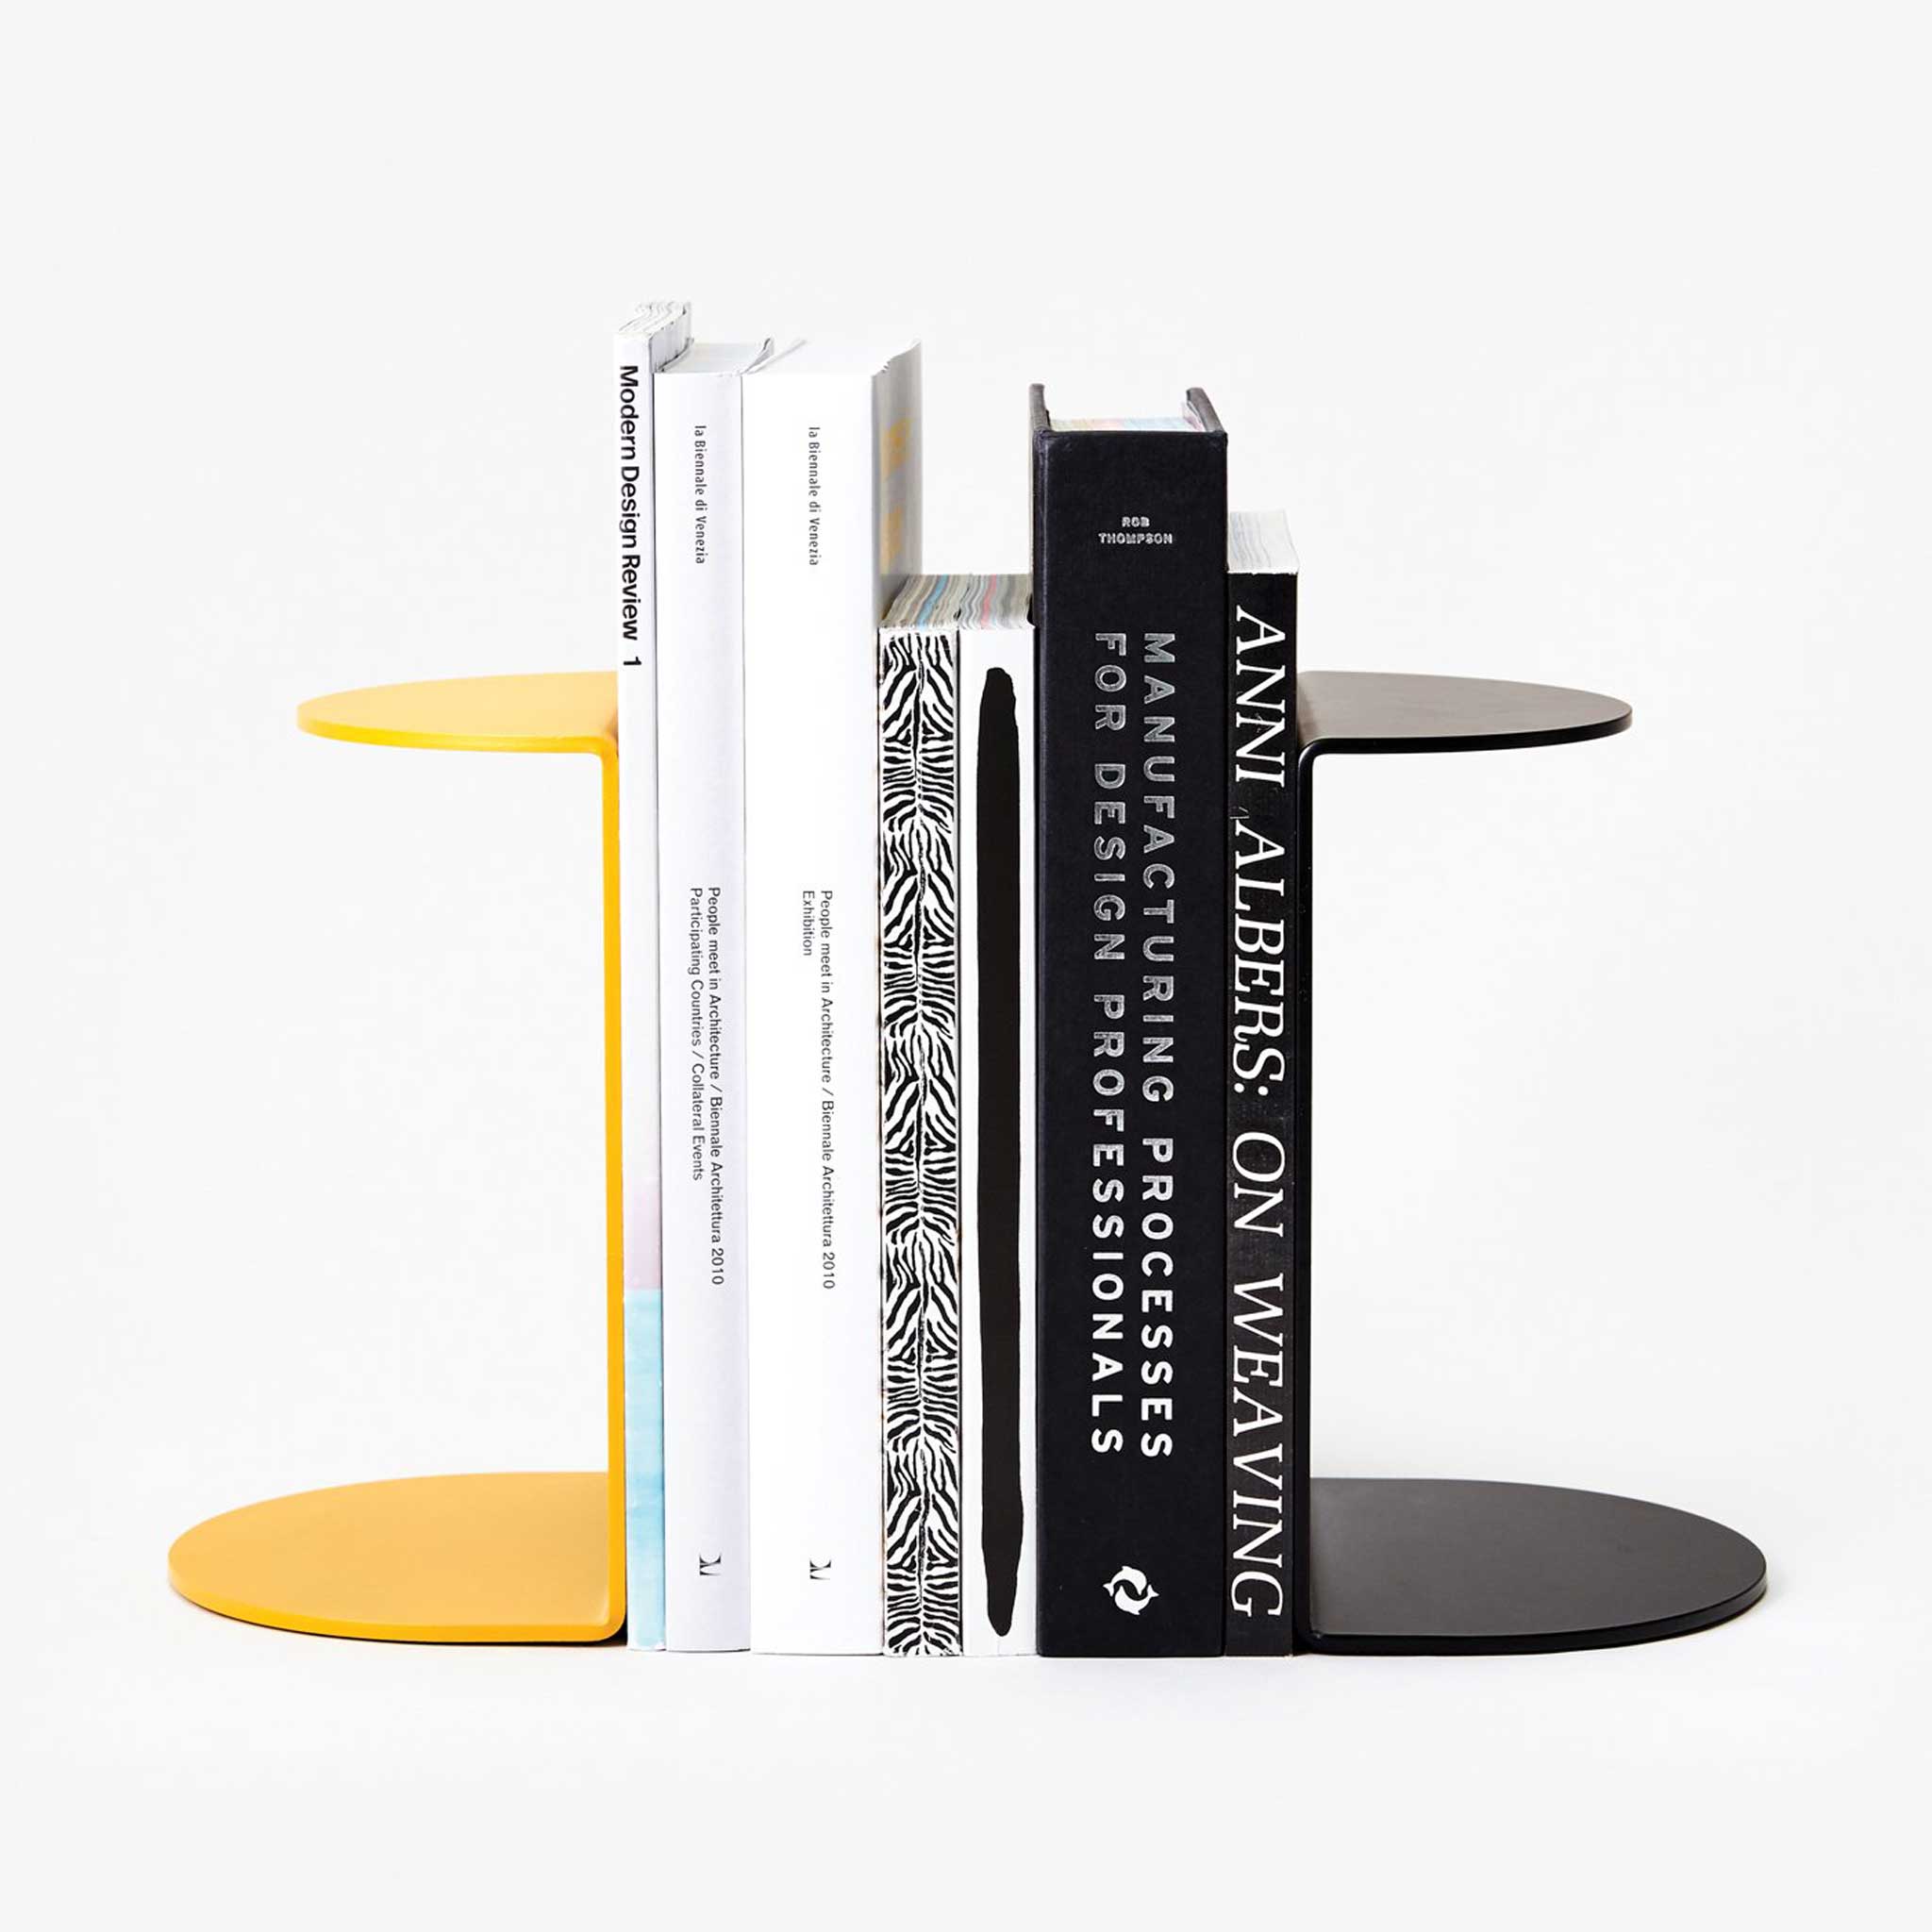 REFERENCE BOOKEND | Henry Julier | Areaware